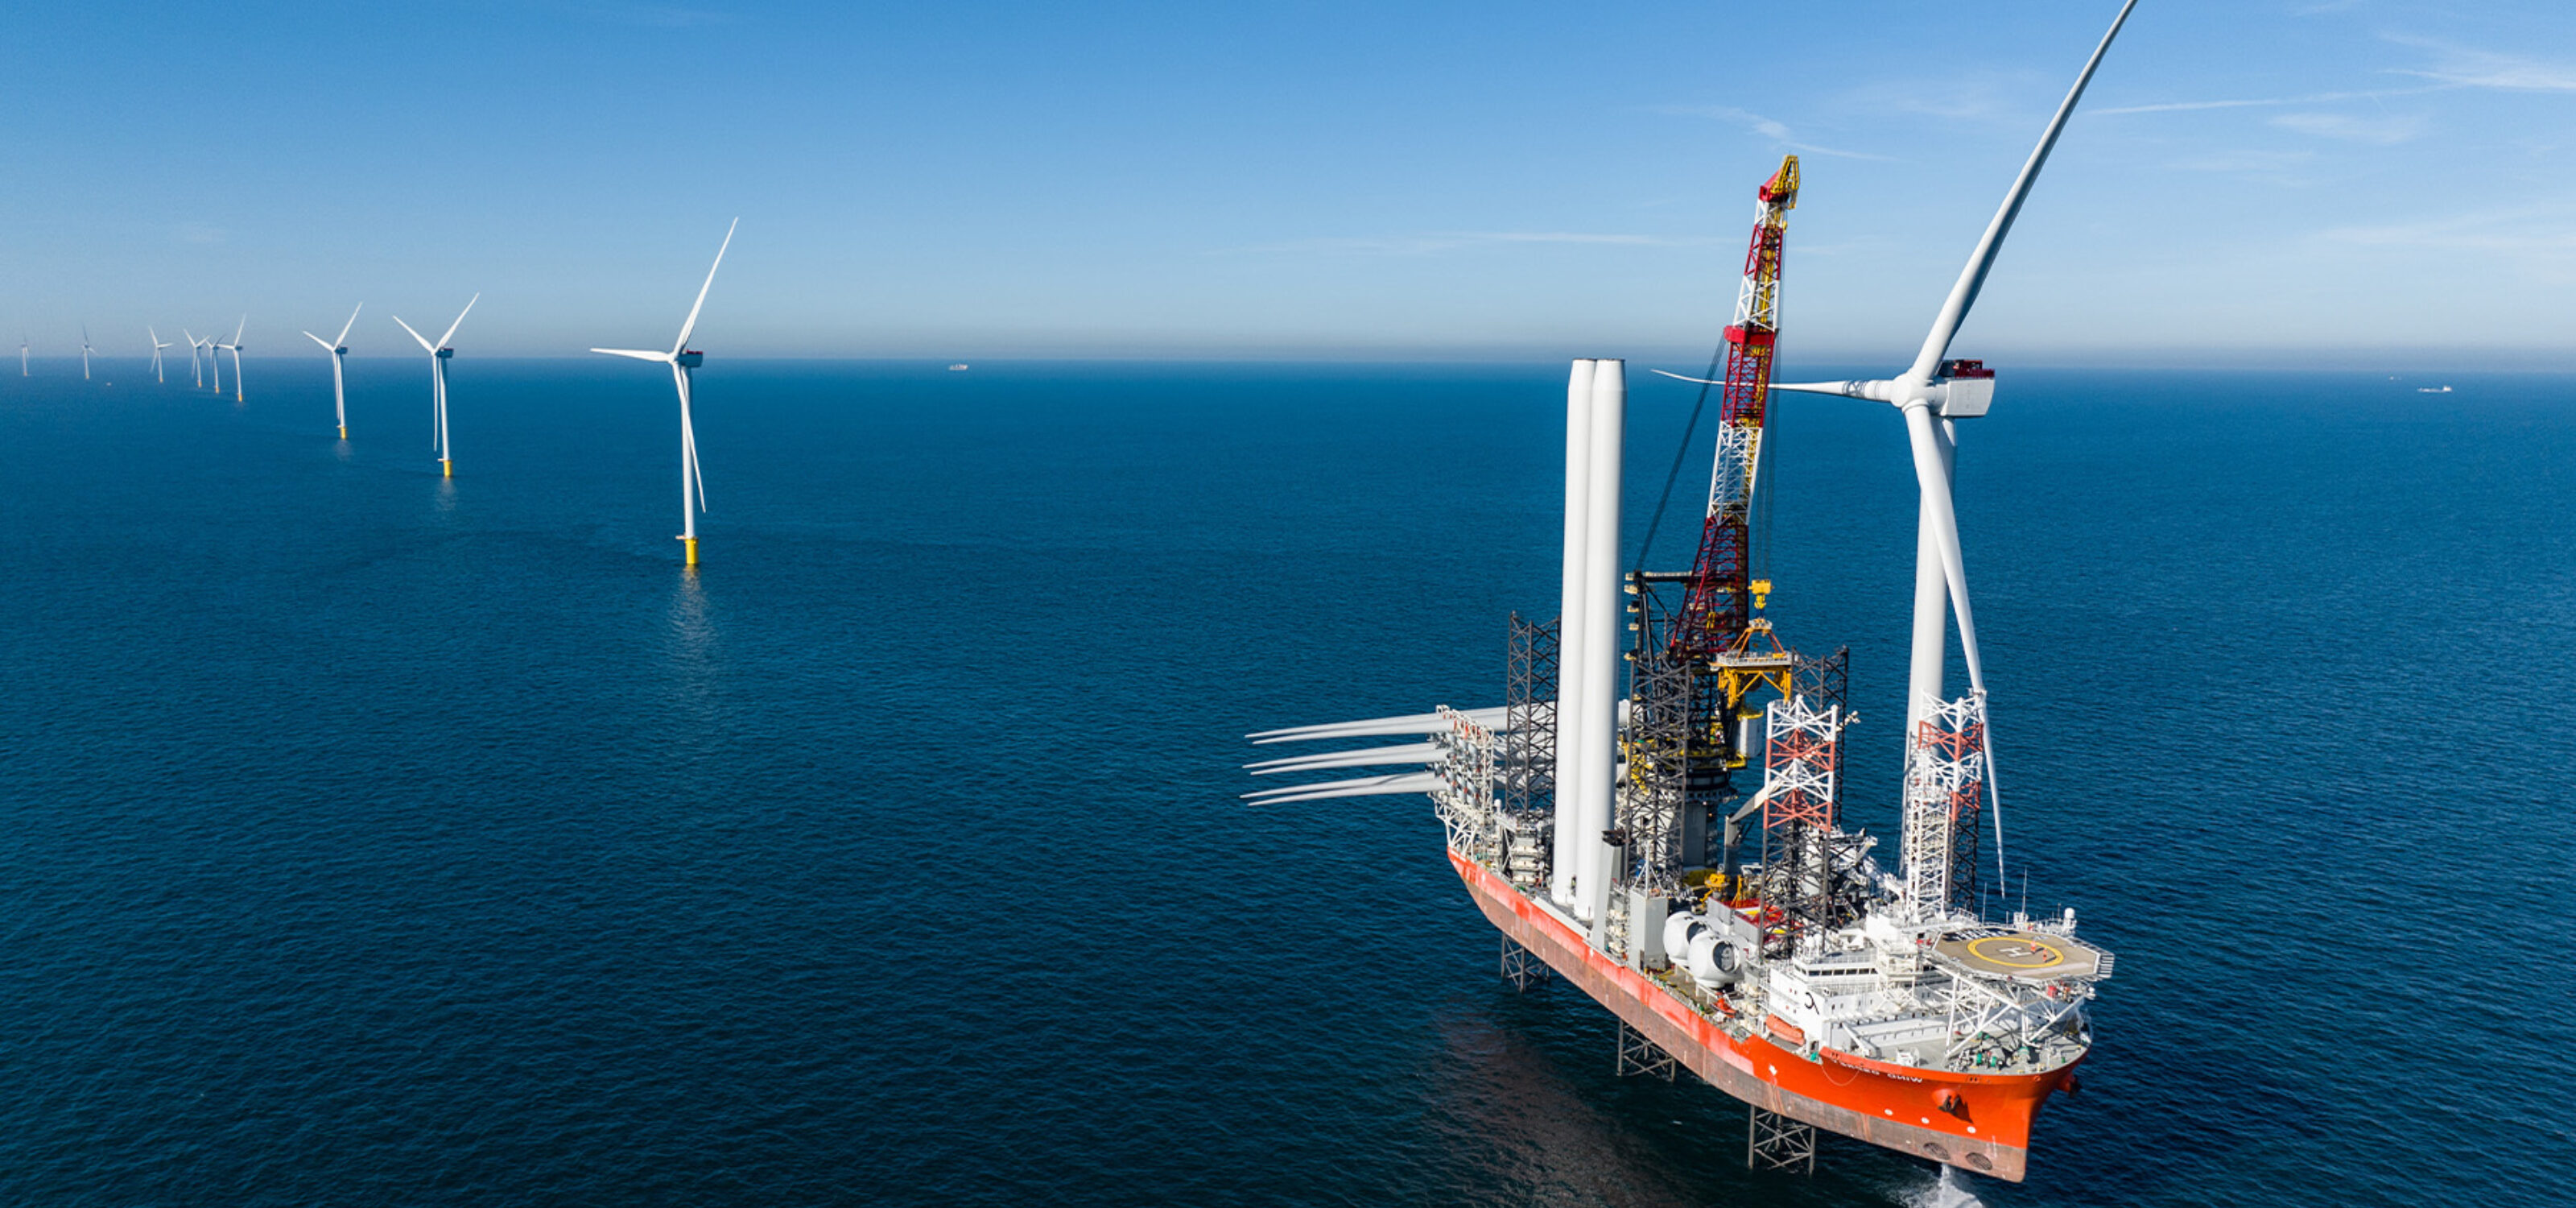 The Netherlands hits offshore wind target of 4.5 GW with Hollandse Kust Noord wind park